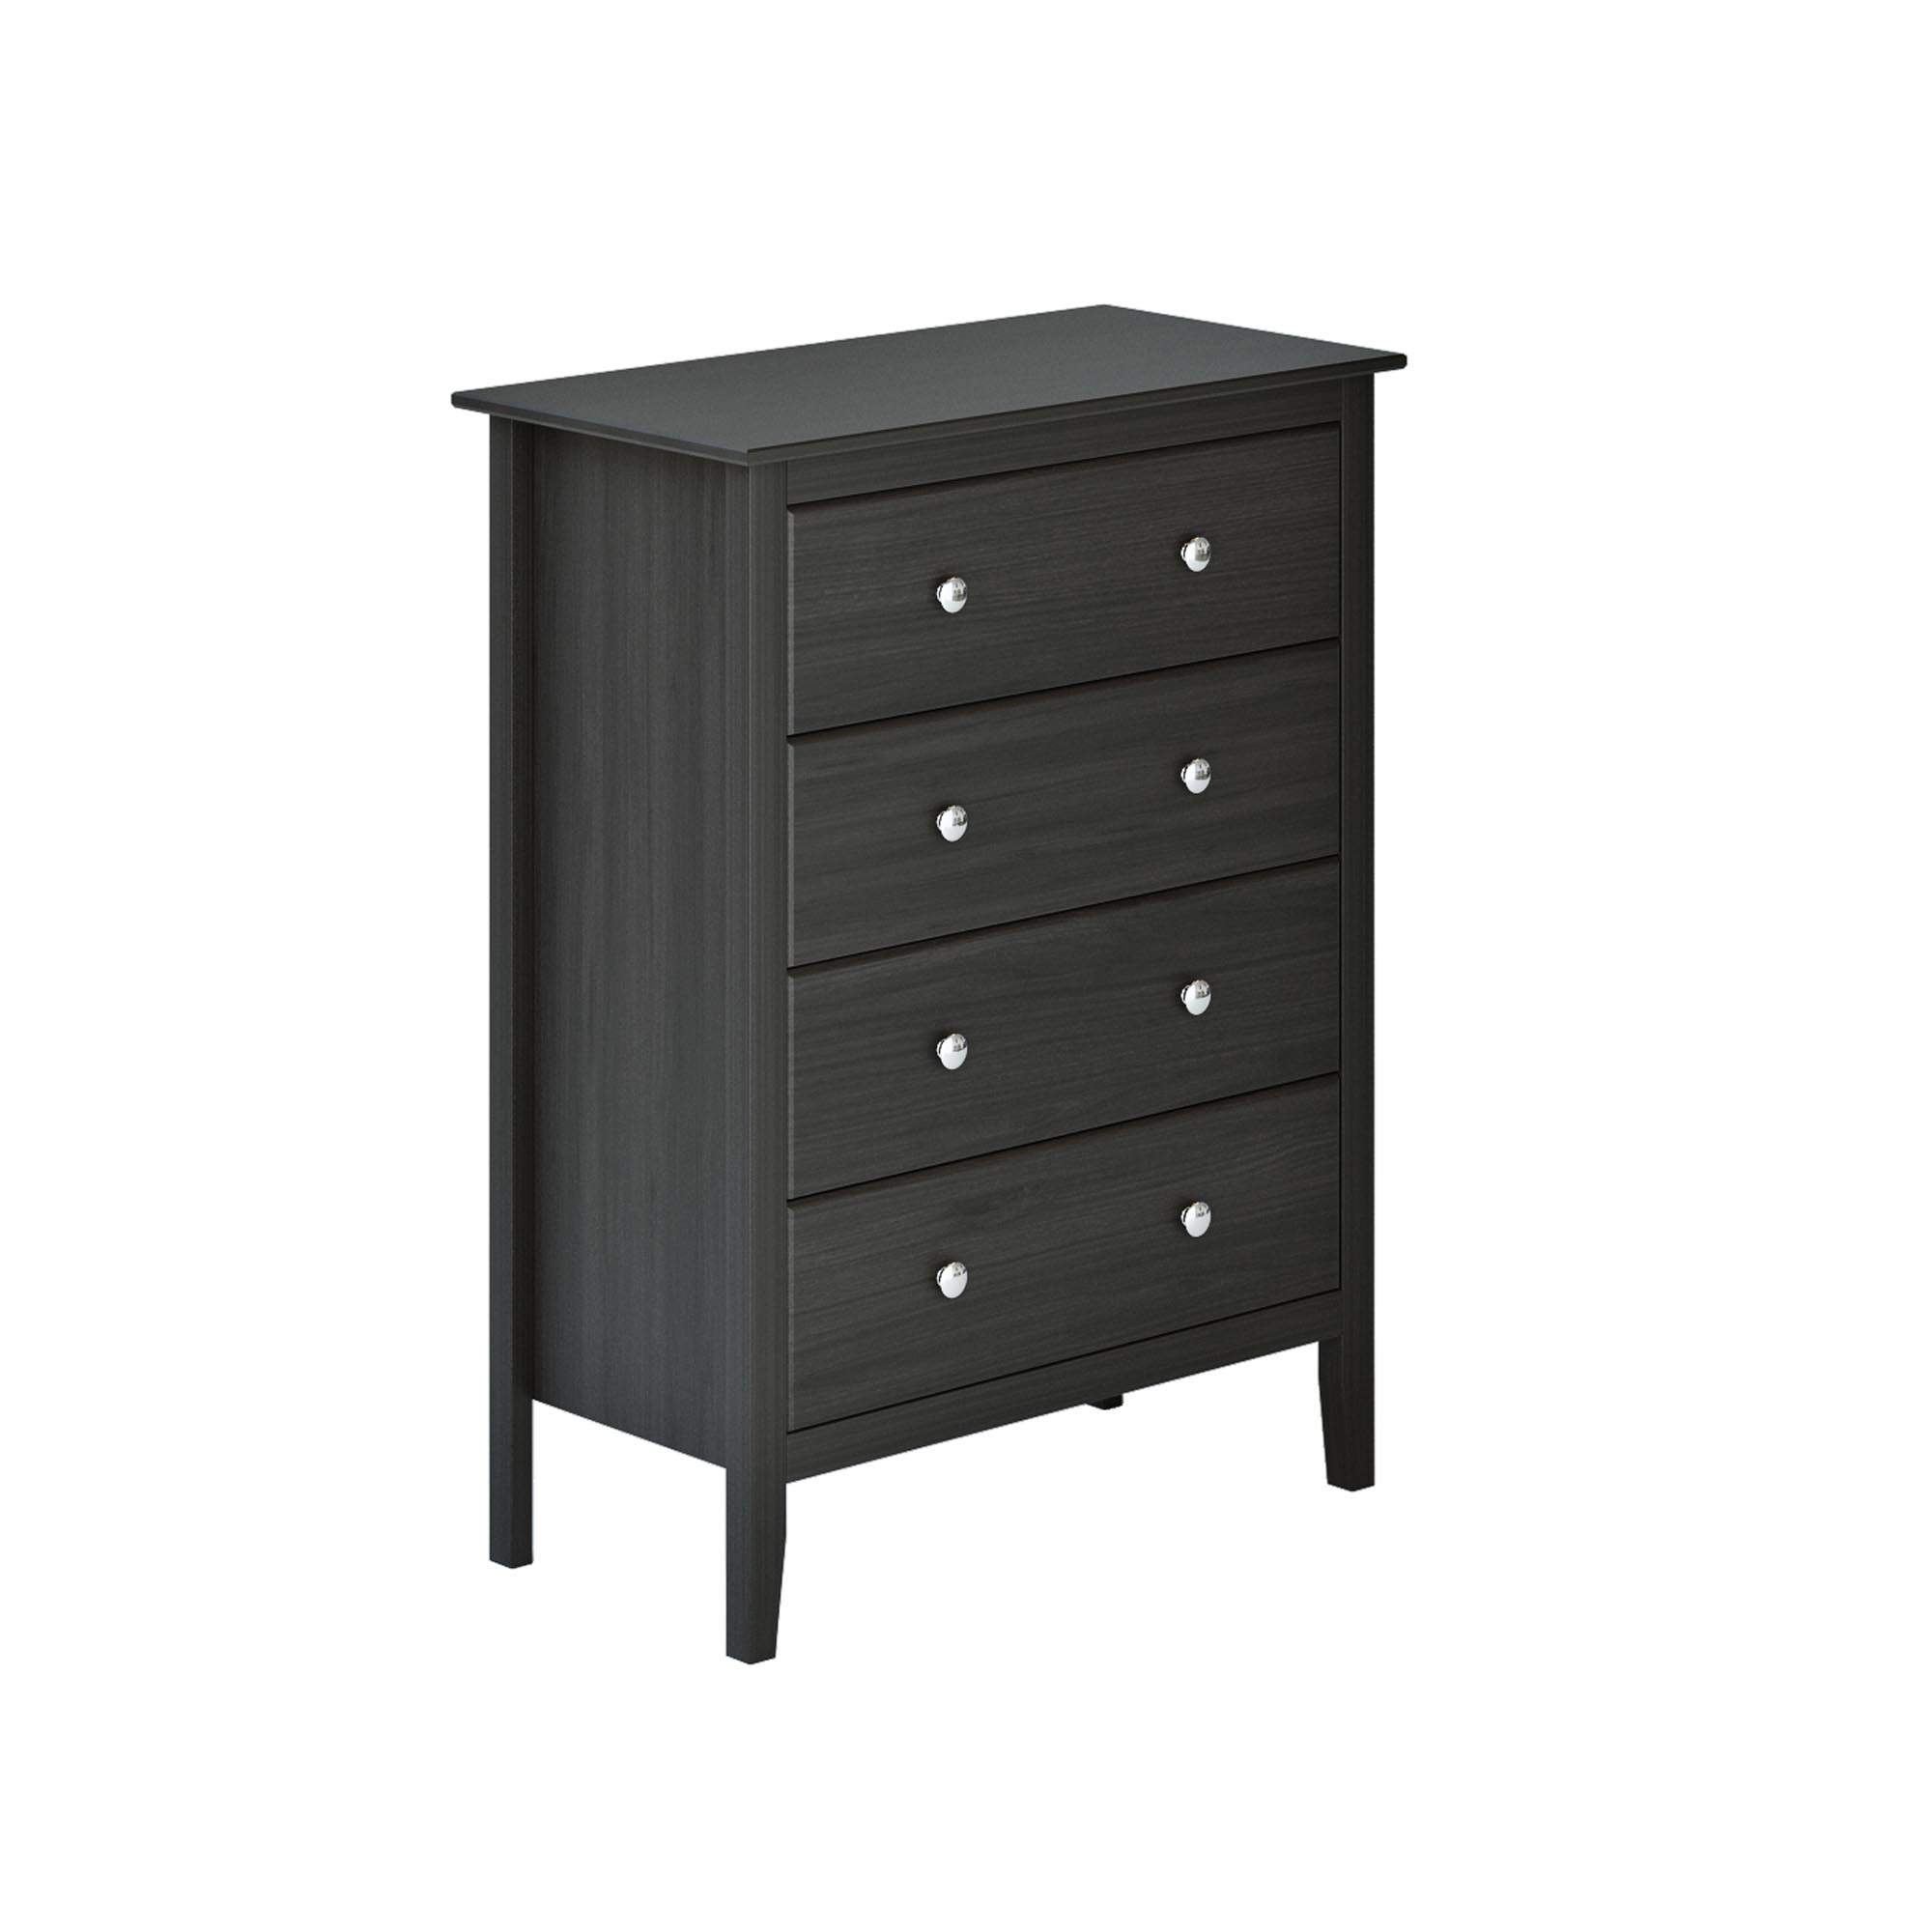 Solid Wood Esy Pieces 4 Drawer Chest Of Drawers - Adeptus 77248